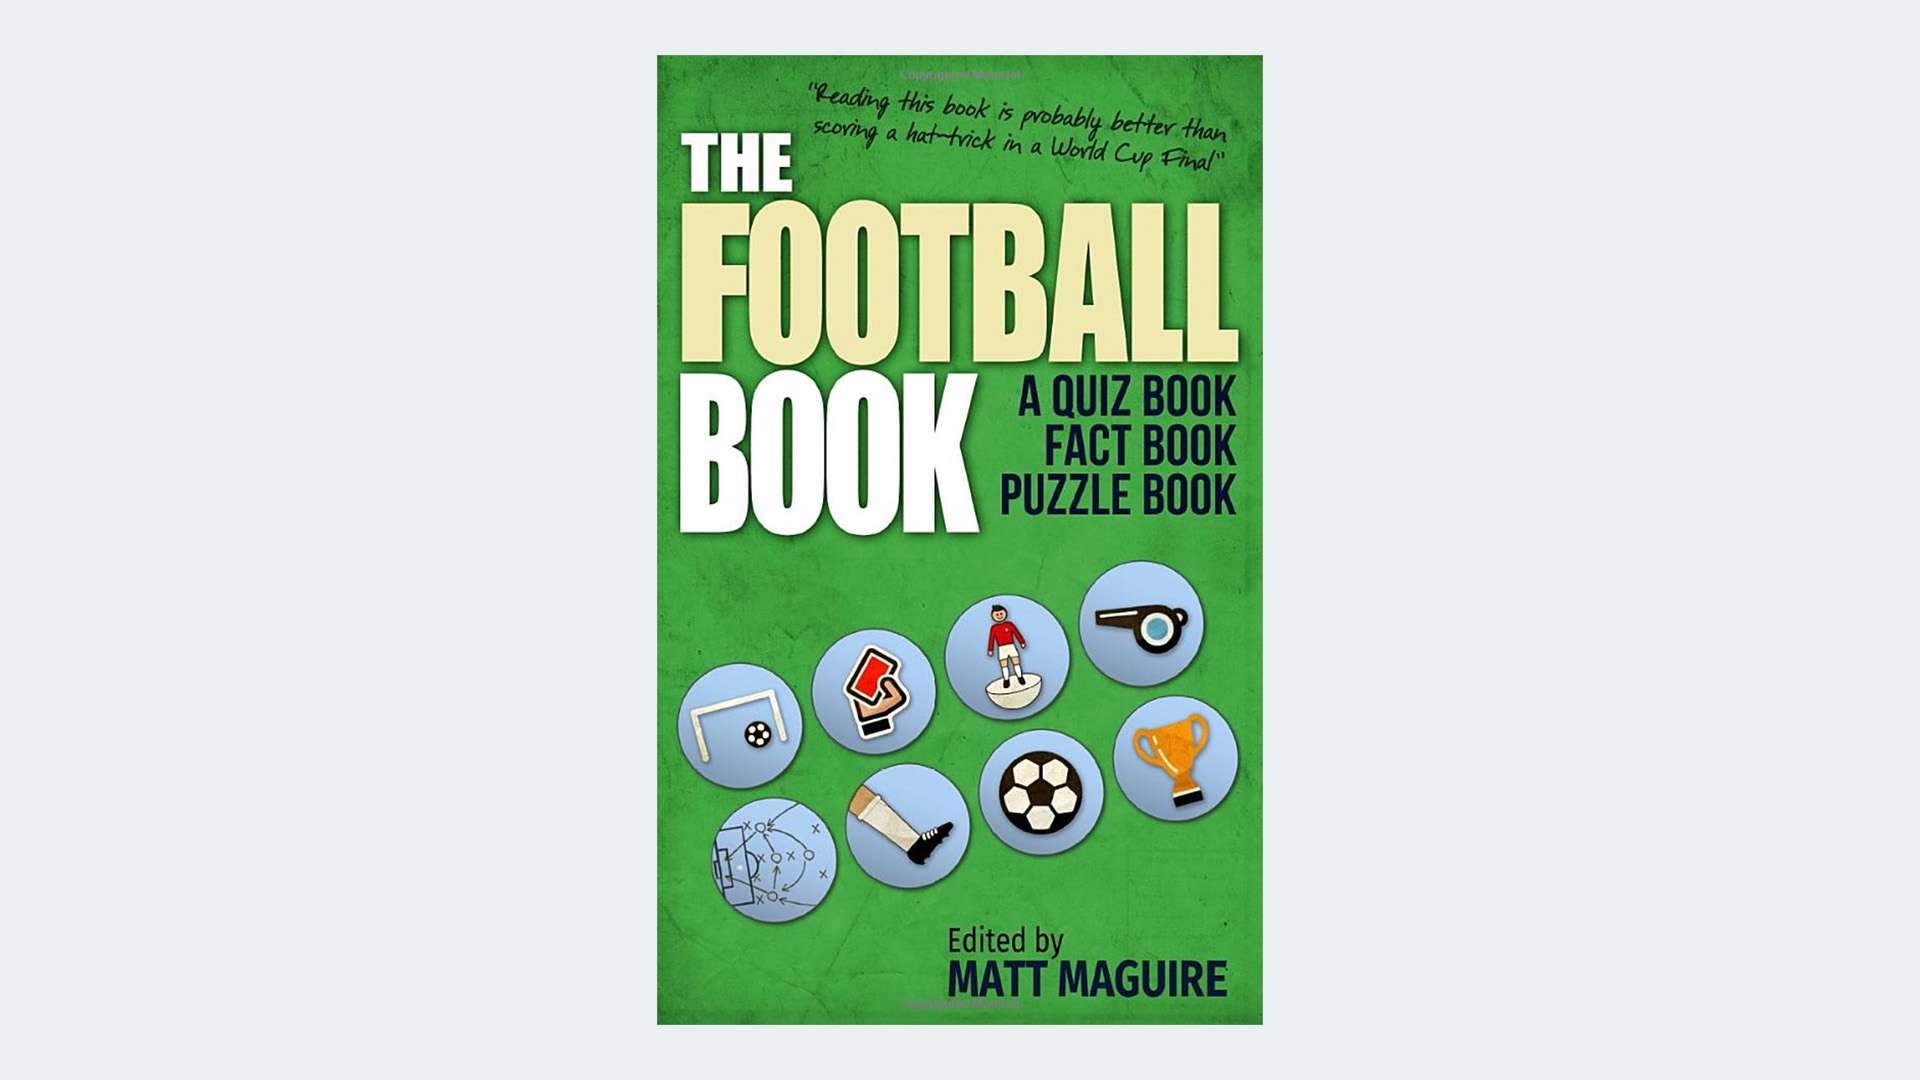 The Football Quiz, Fact and Puzzle Book